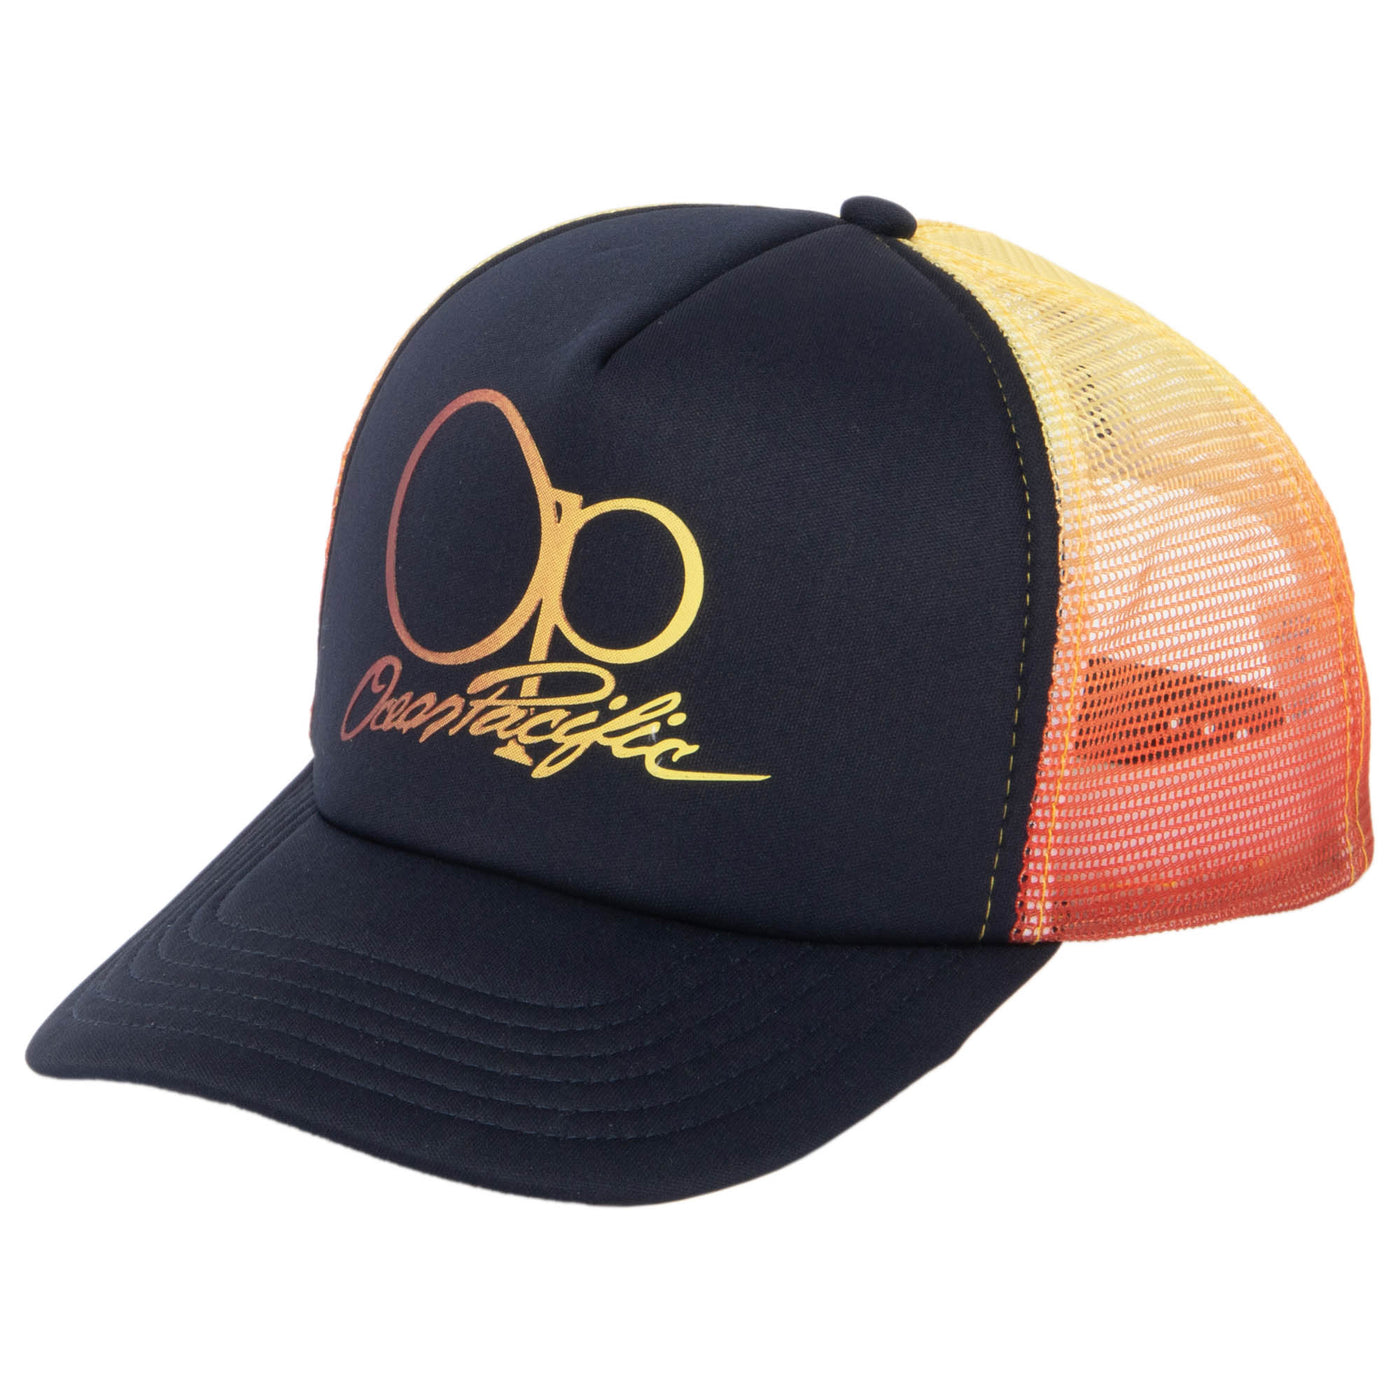 Ocean Pacific - 5 Panel Trucker Hat with Ombre Mesh Panels-Trucker-San Diego Hat Company